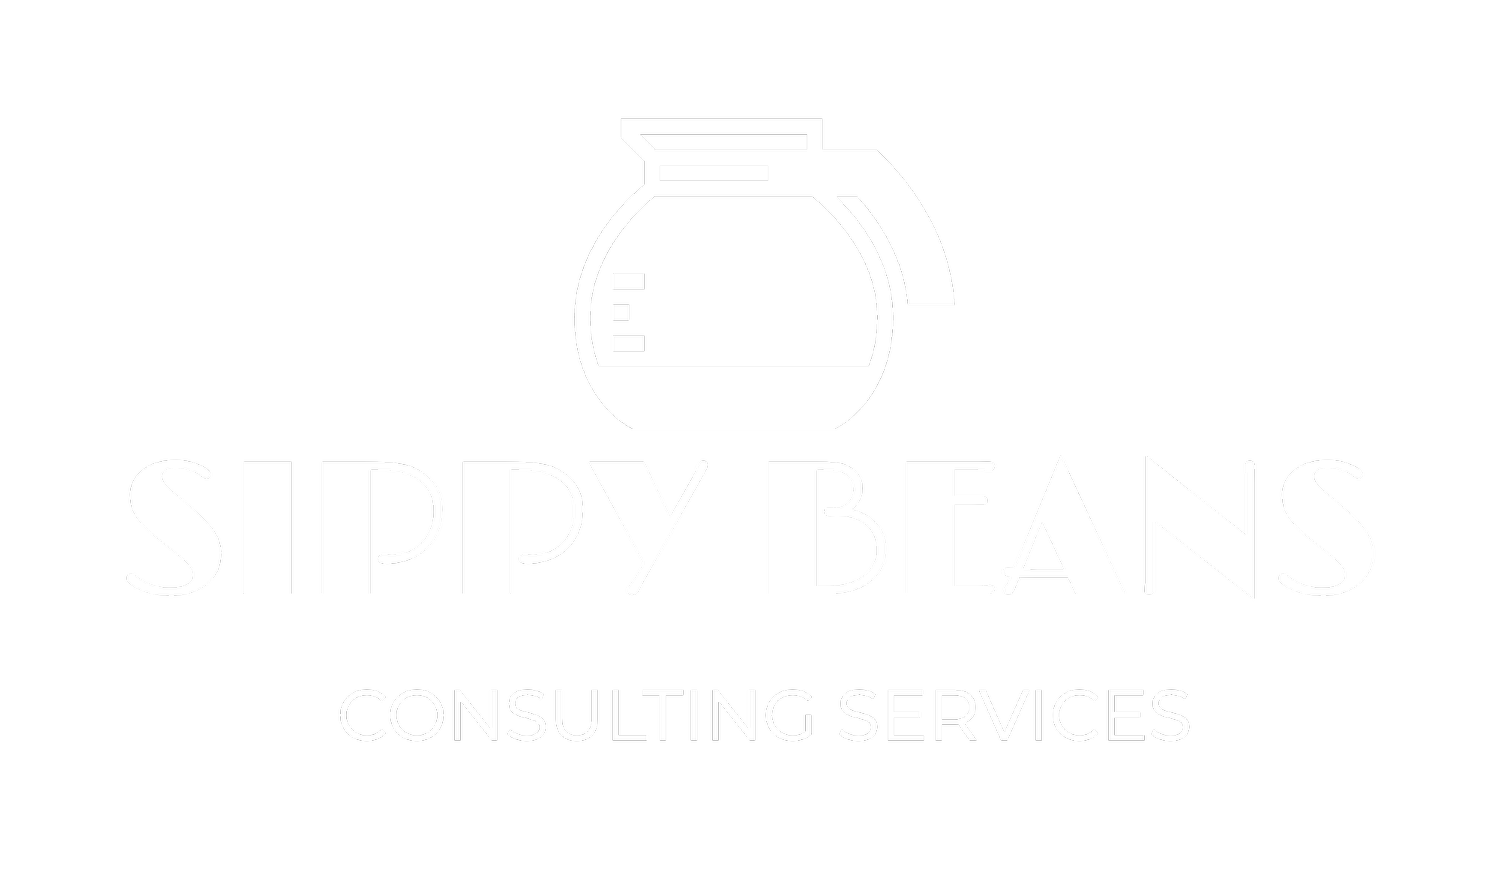 SIPPY BEANS Consulting